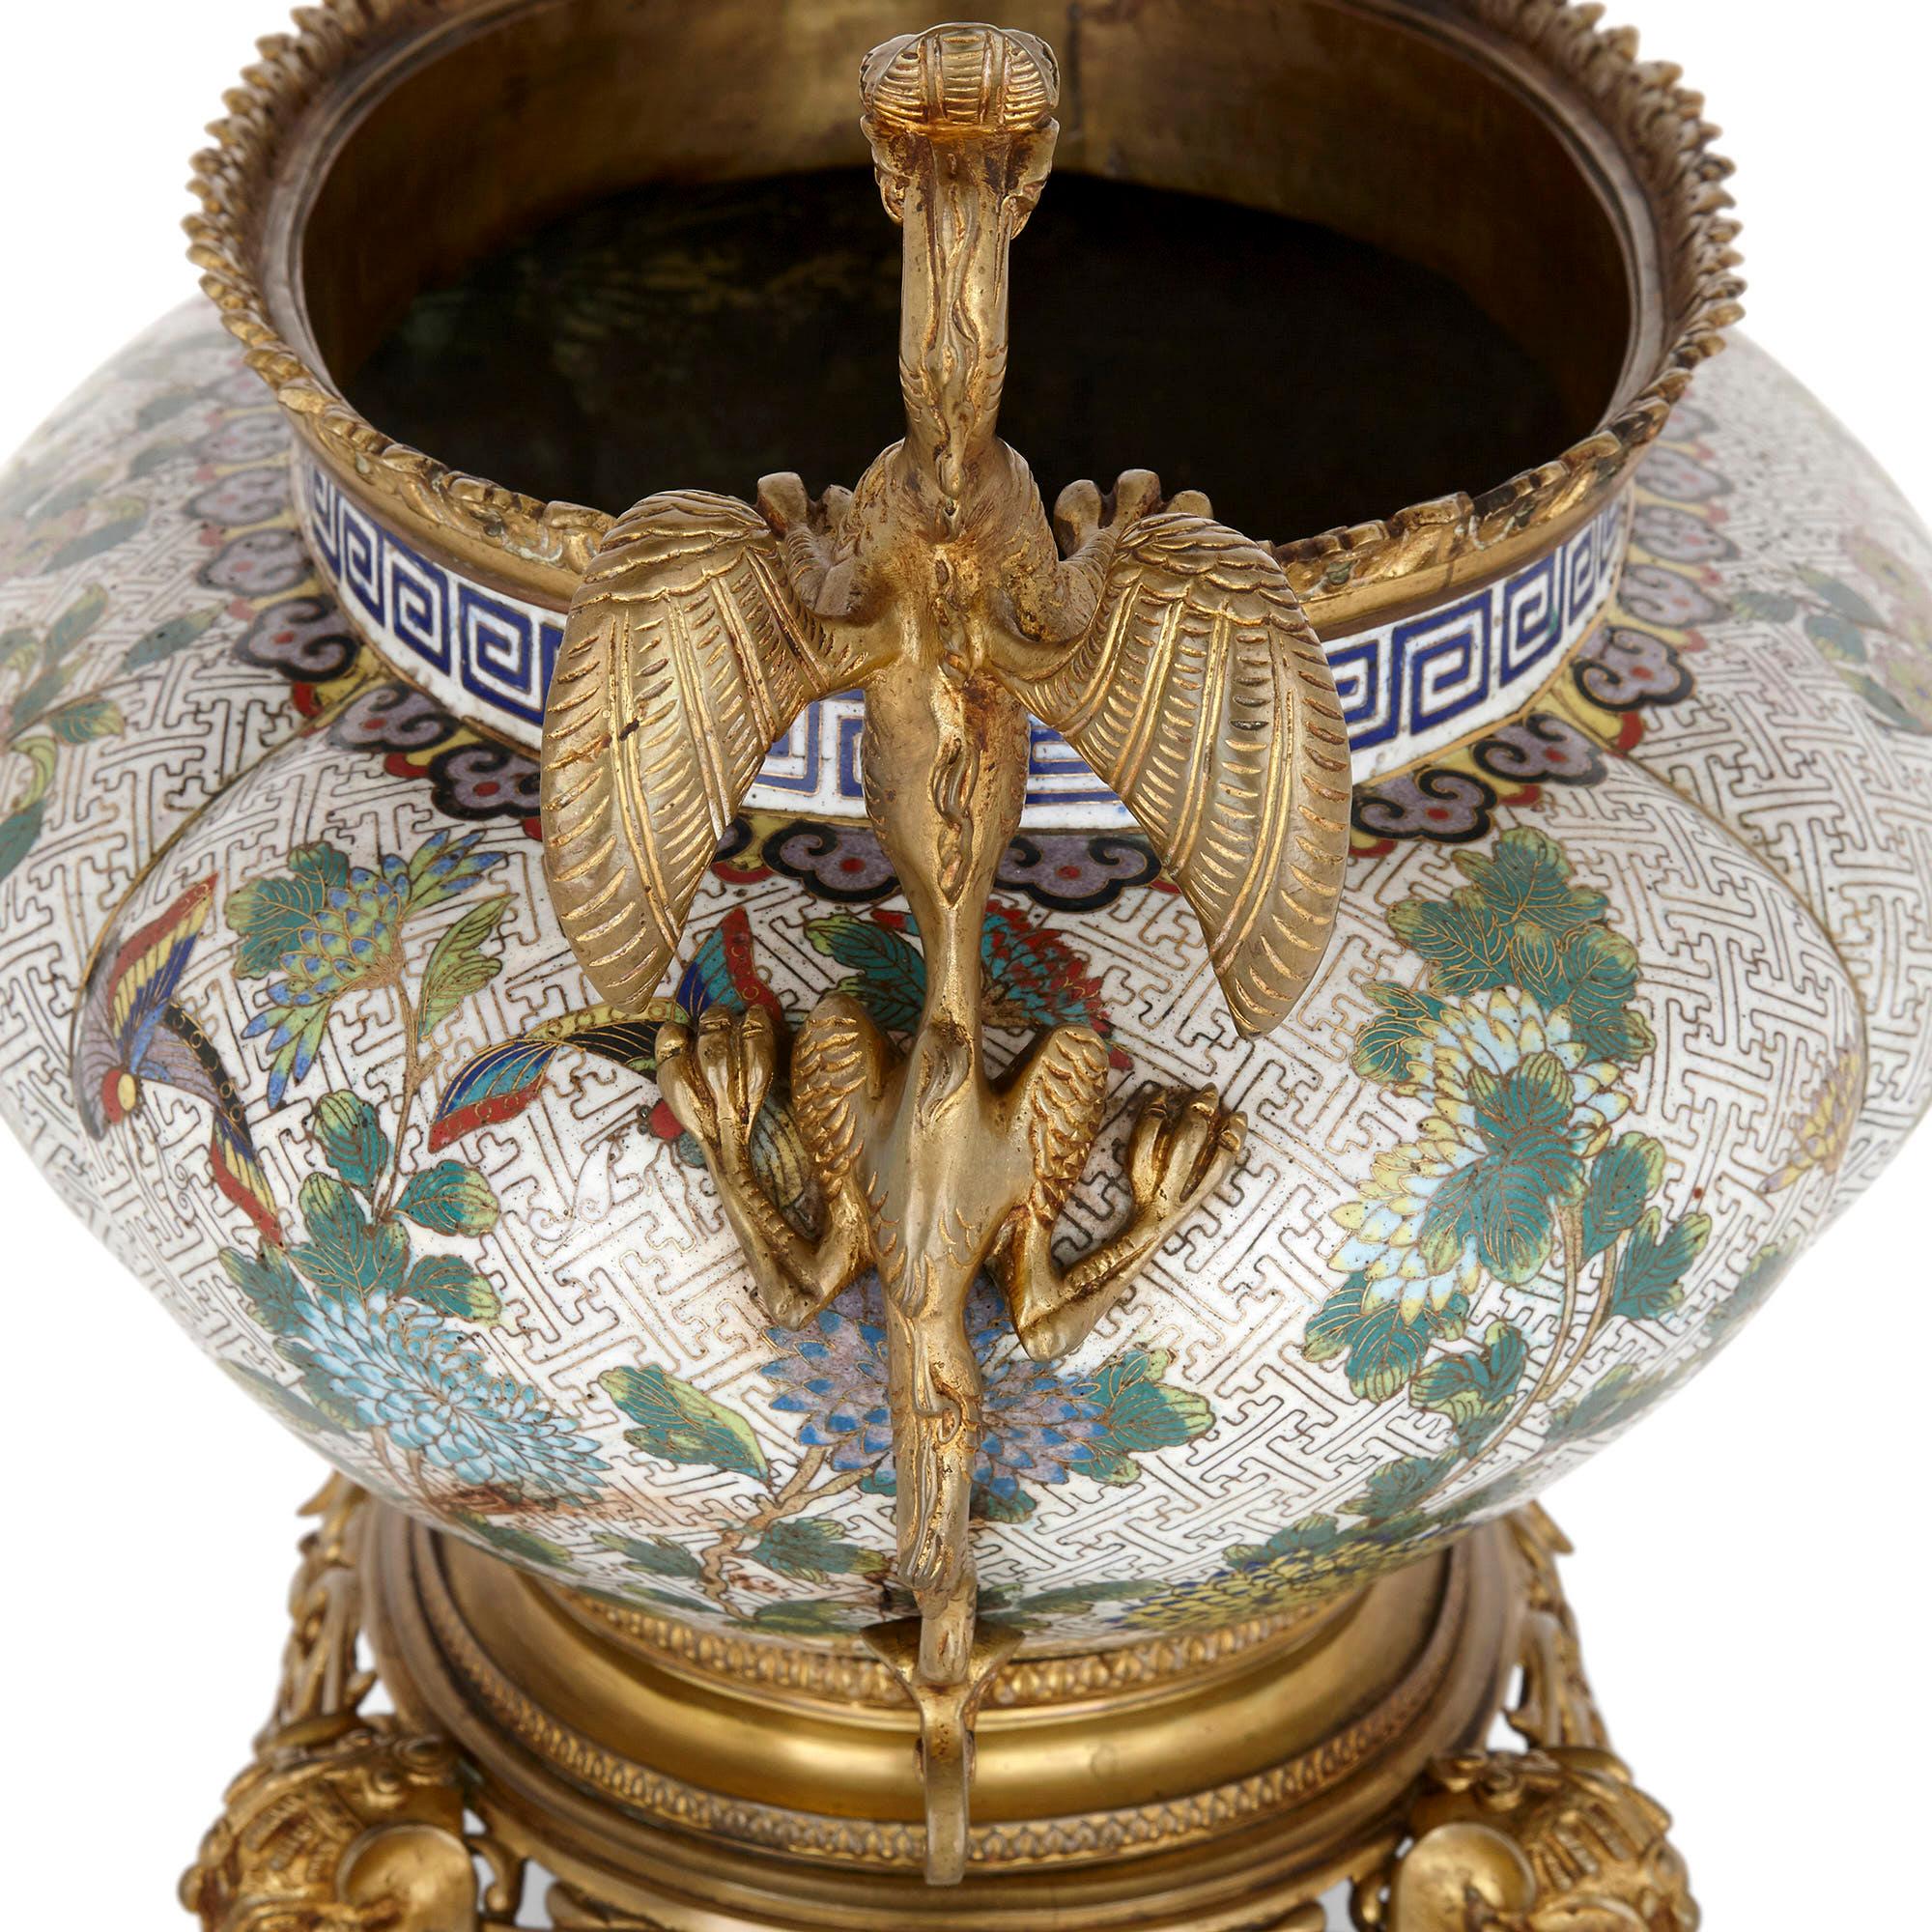 Chinoiserie Chinese Cloisonné Enamel and French Gilt Bronze Jardinière